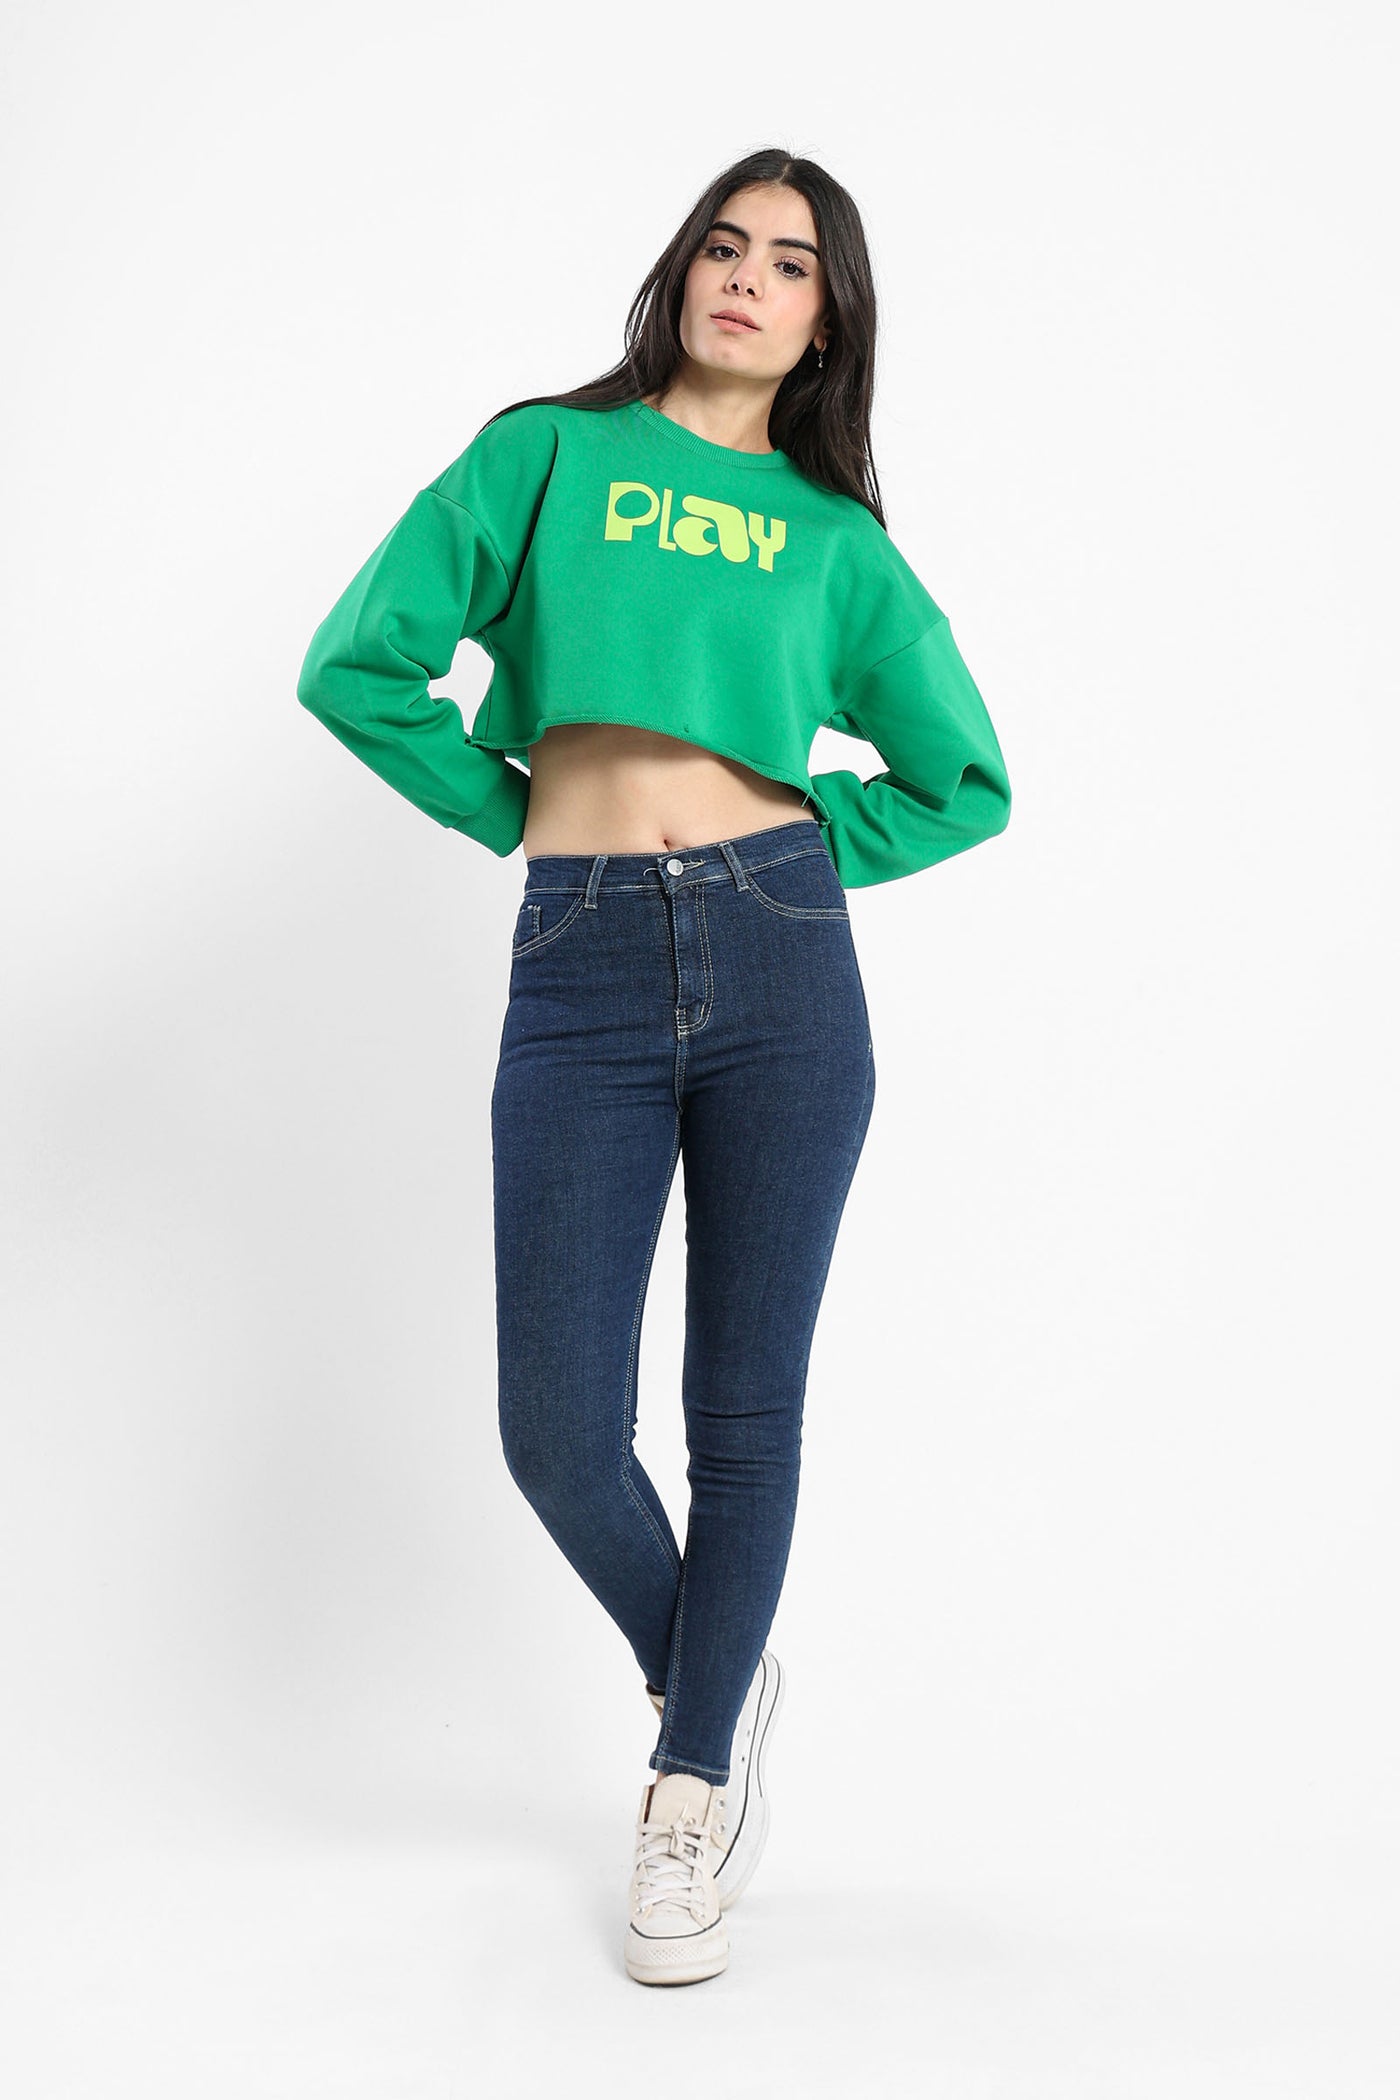 Sweatshirt - Cropped - "Play" Front Print